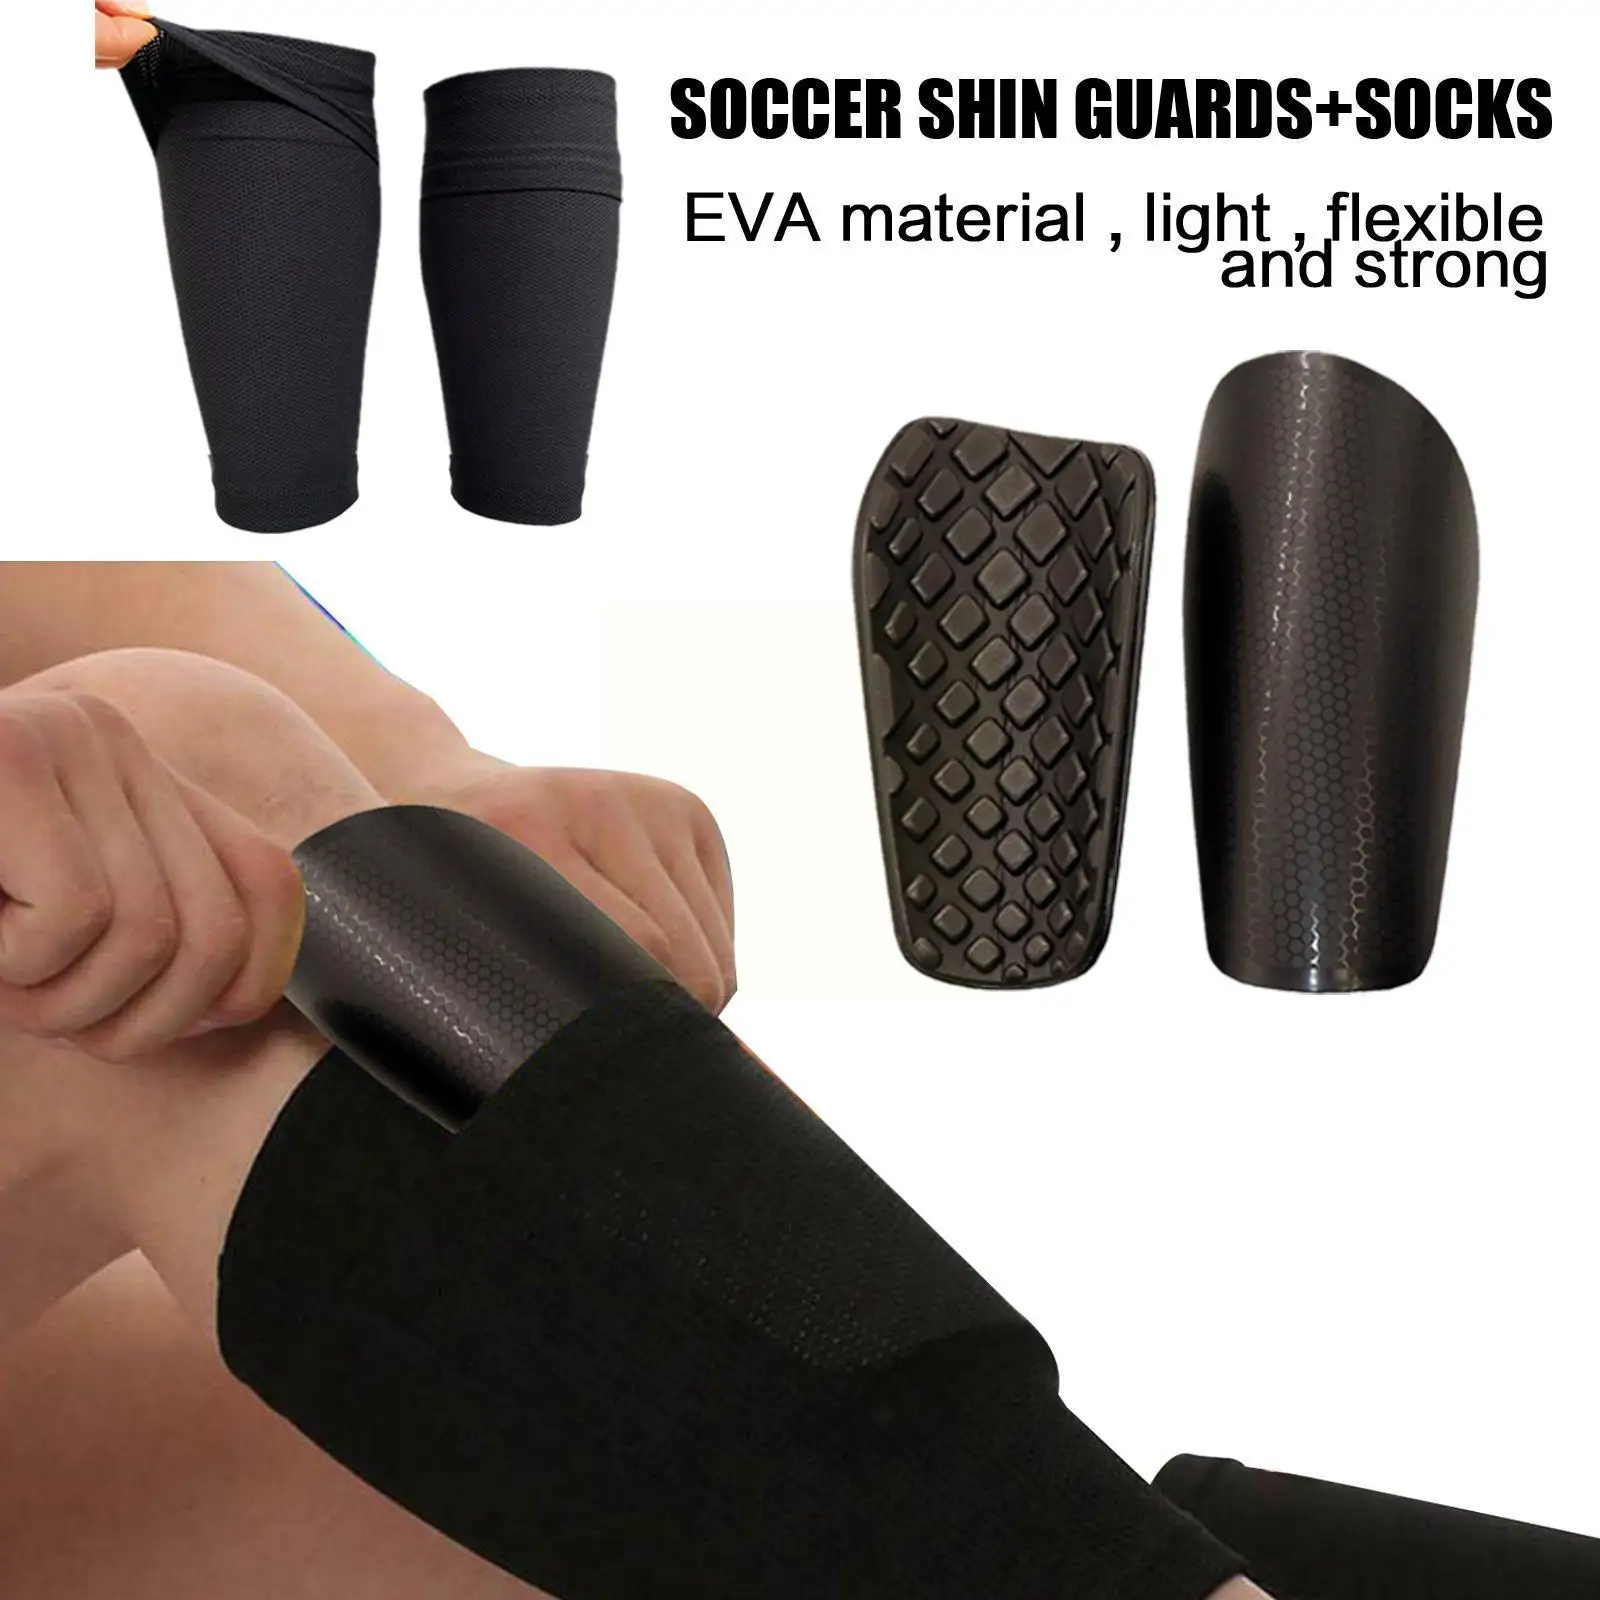 

Soccer Shin Guards Pads For Kids/adult Football Legging Shinguards Sleeves Protective Gear 1 Pair Size XS/S/M/L Football Ki L5T9